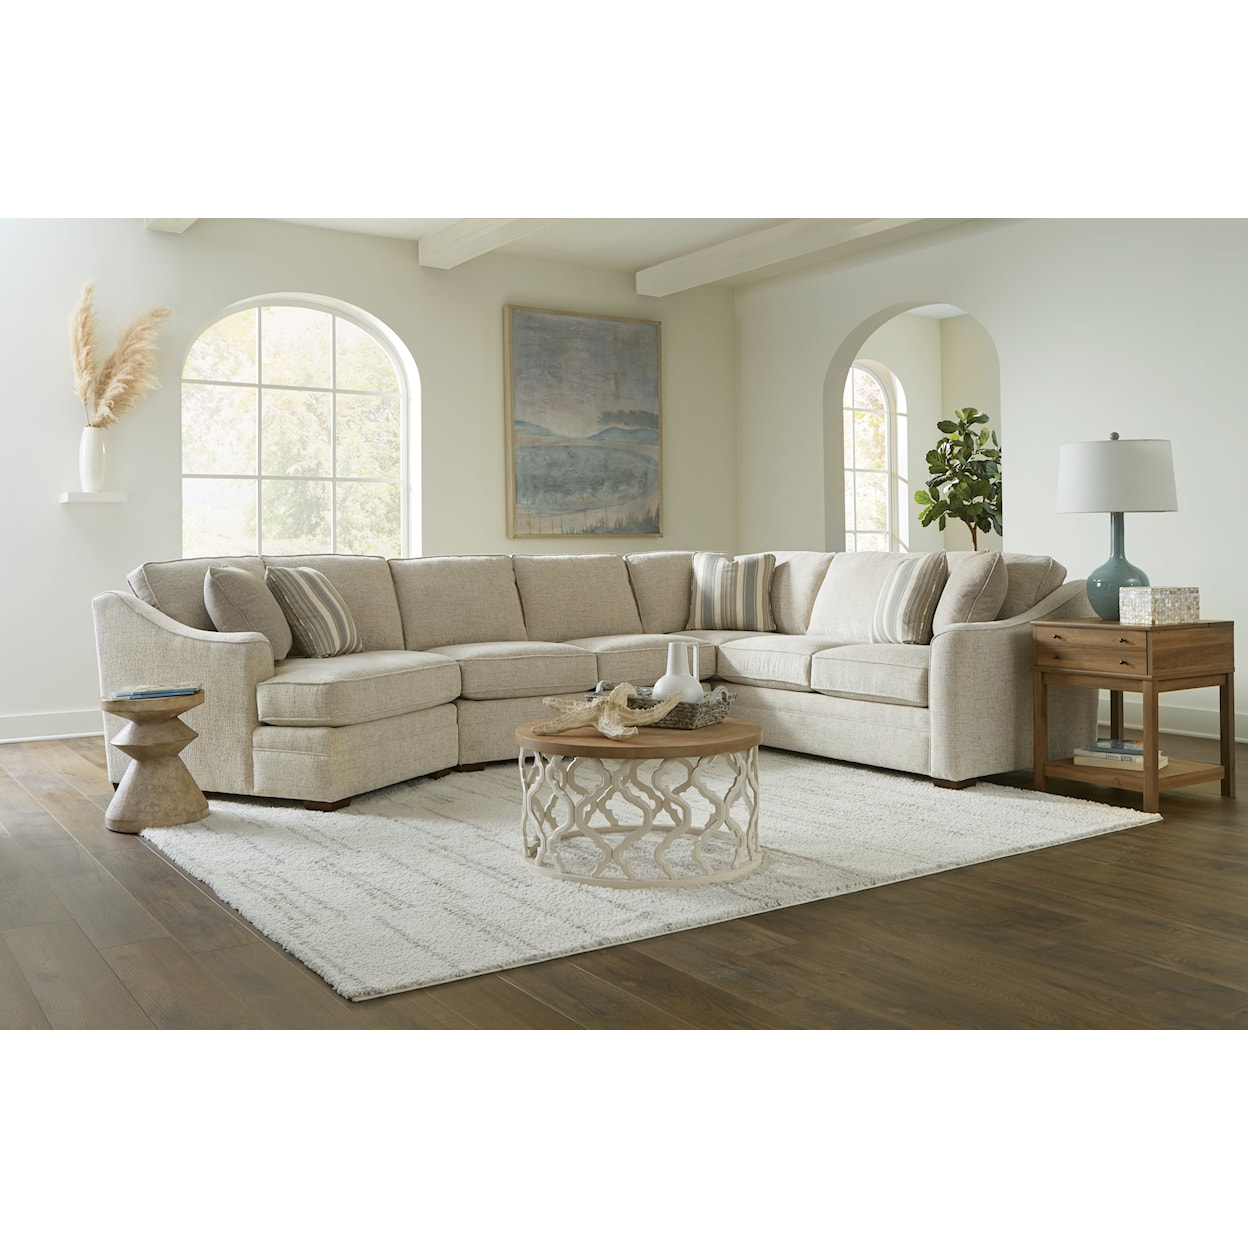 Craftmaster F9 Design Options 3-Piece Sectional Sofa with LAF Cuddler